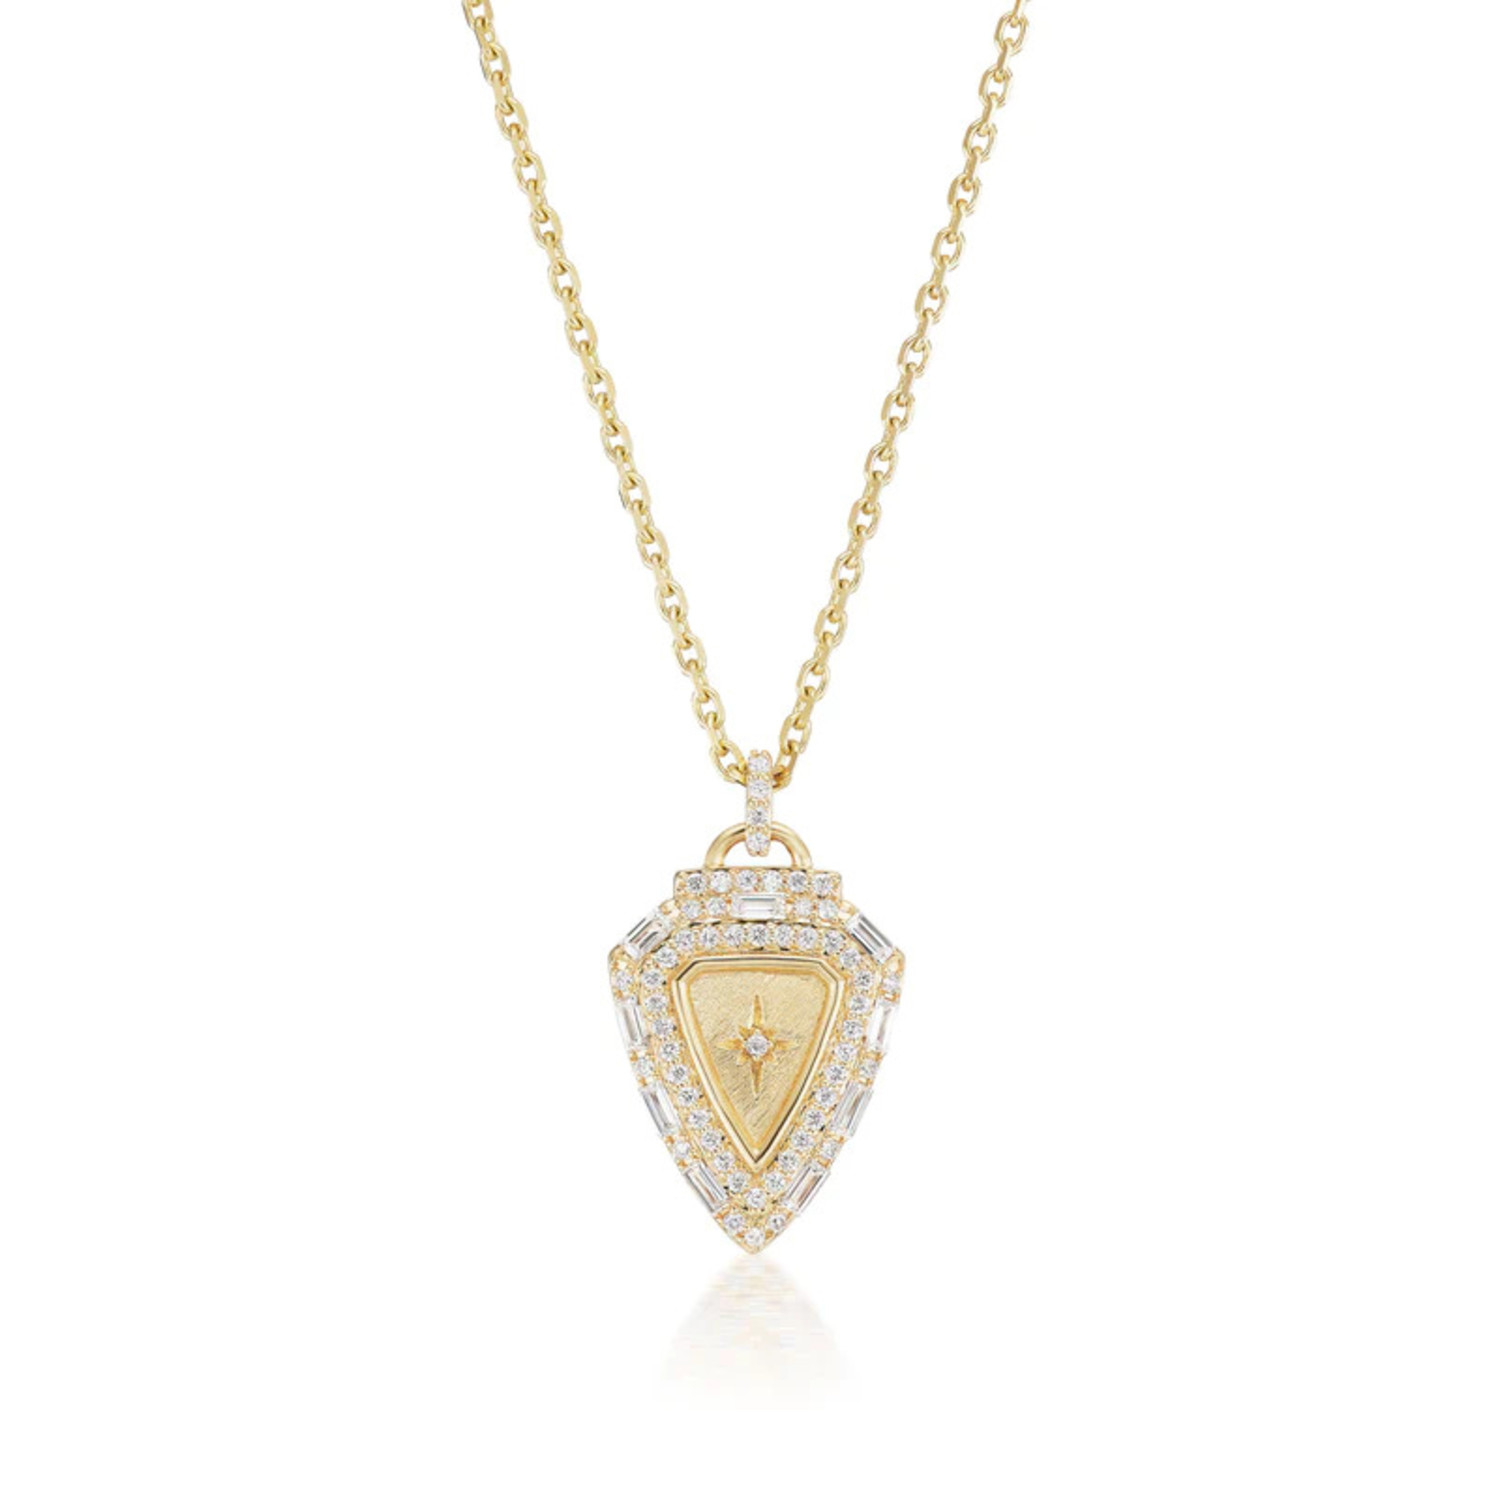 Empress Shield Necklace in 18K Yellow Gold